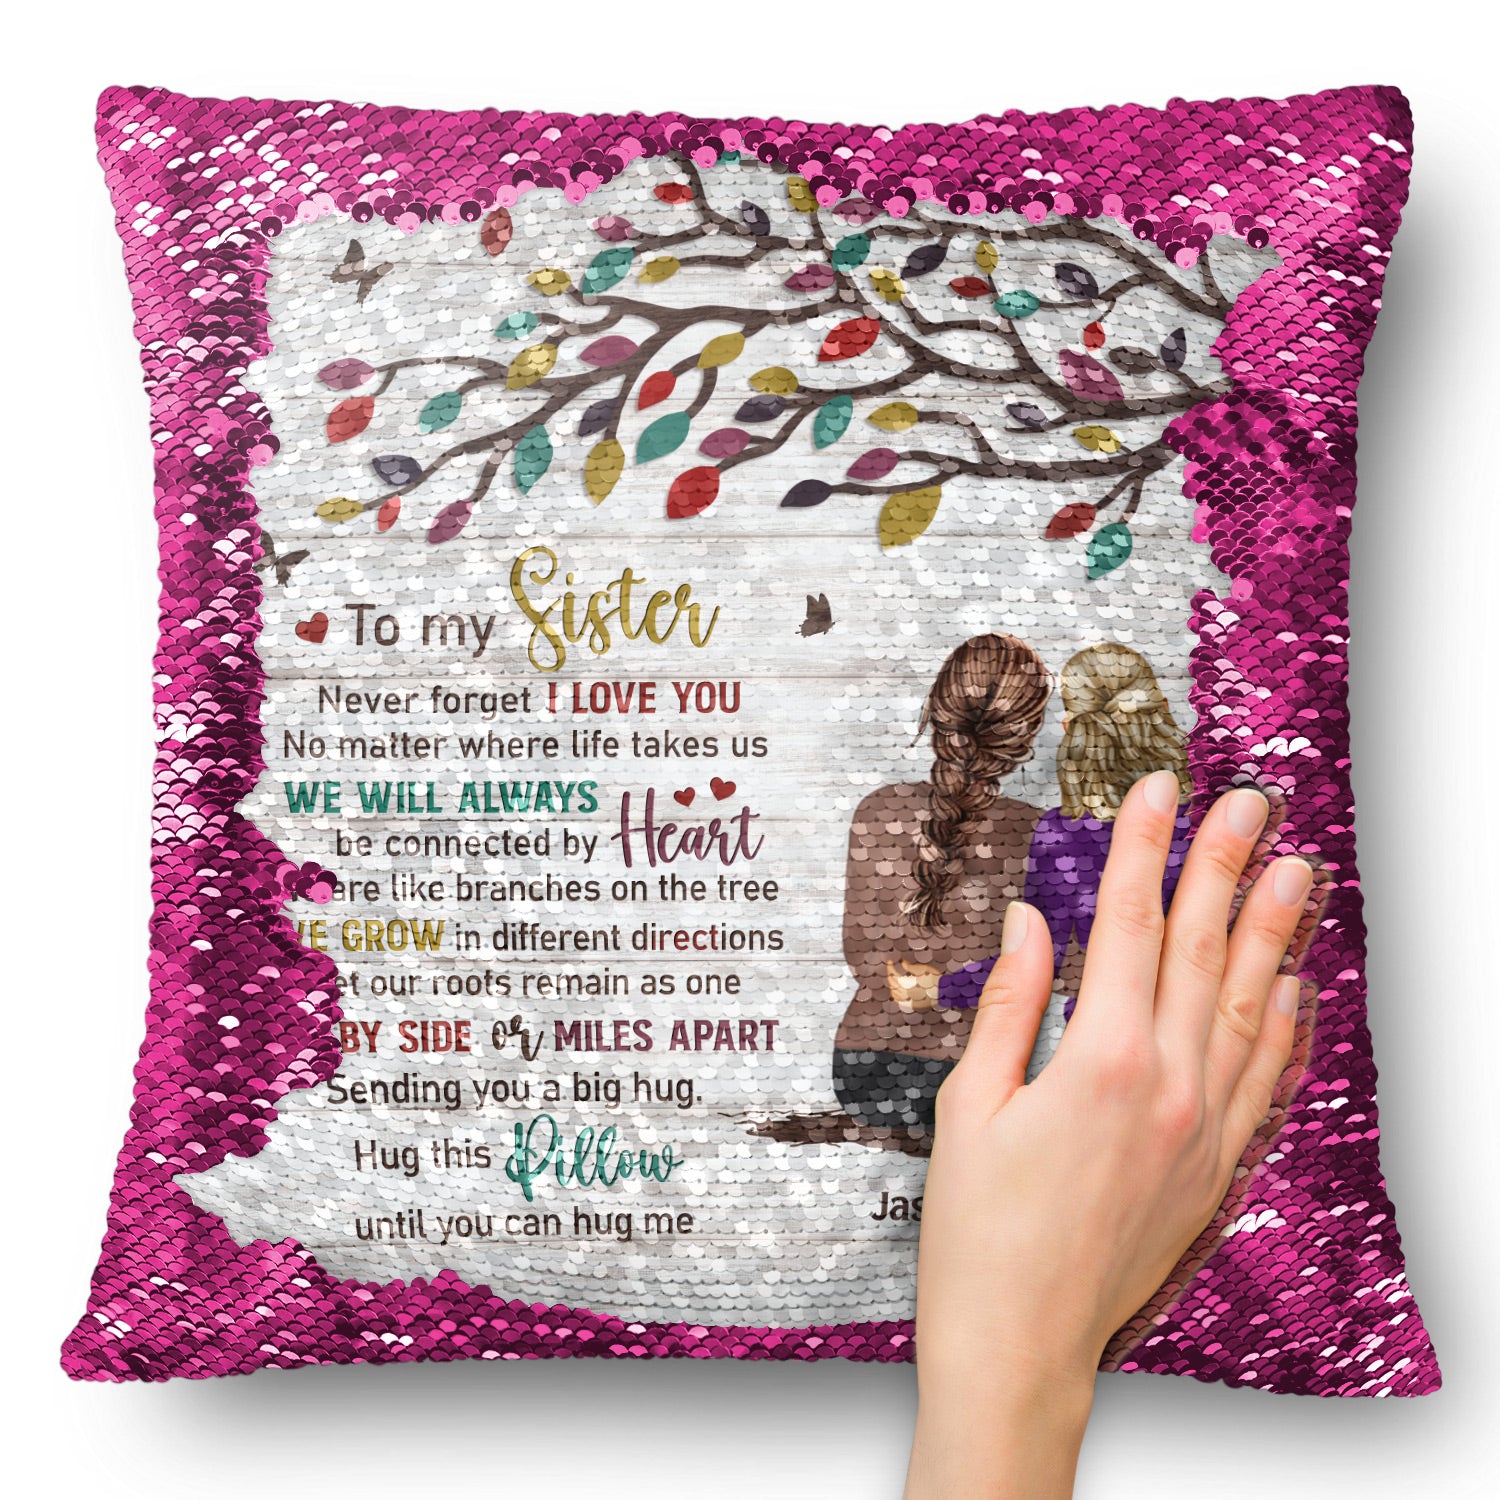 No Matter Where Life Takes Us - Gift For Sisters, Siblings - Personalized Sequin Pillow, Mermaid Sequin Cushion Magic Reversible Throw Pillow